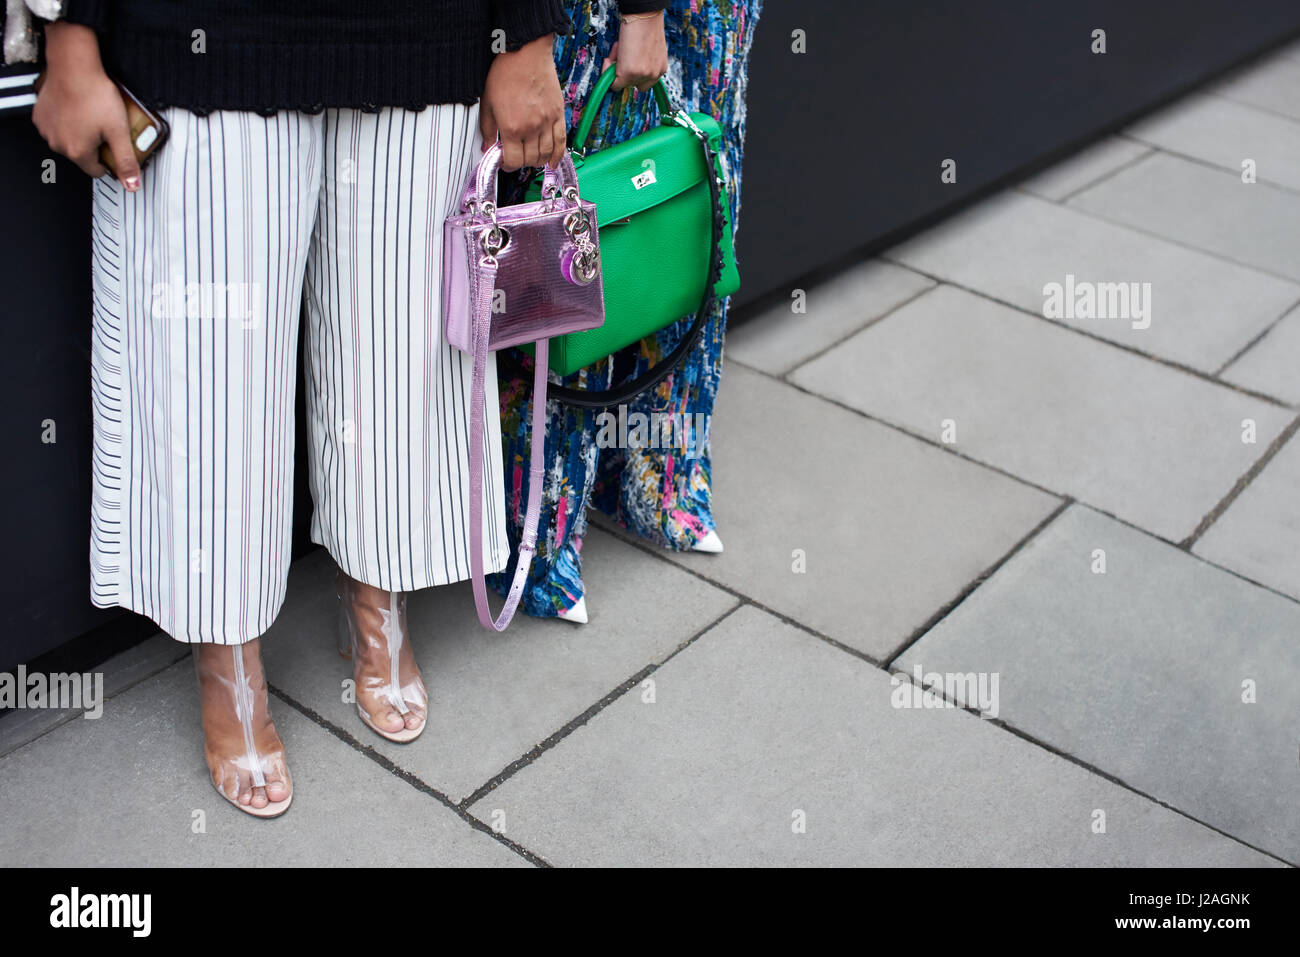 LONDON - FEBRUARY, 2017: Low section of fashionable woman wearing